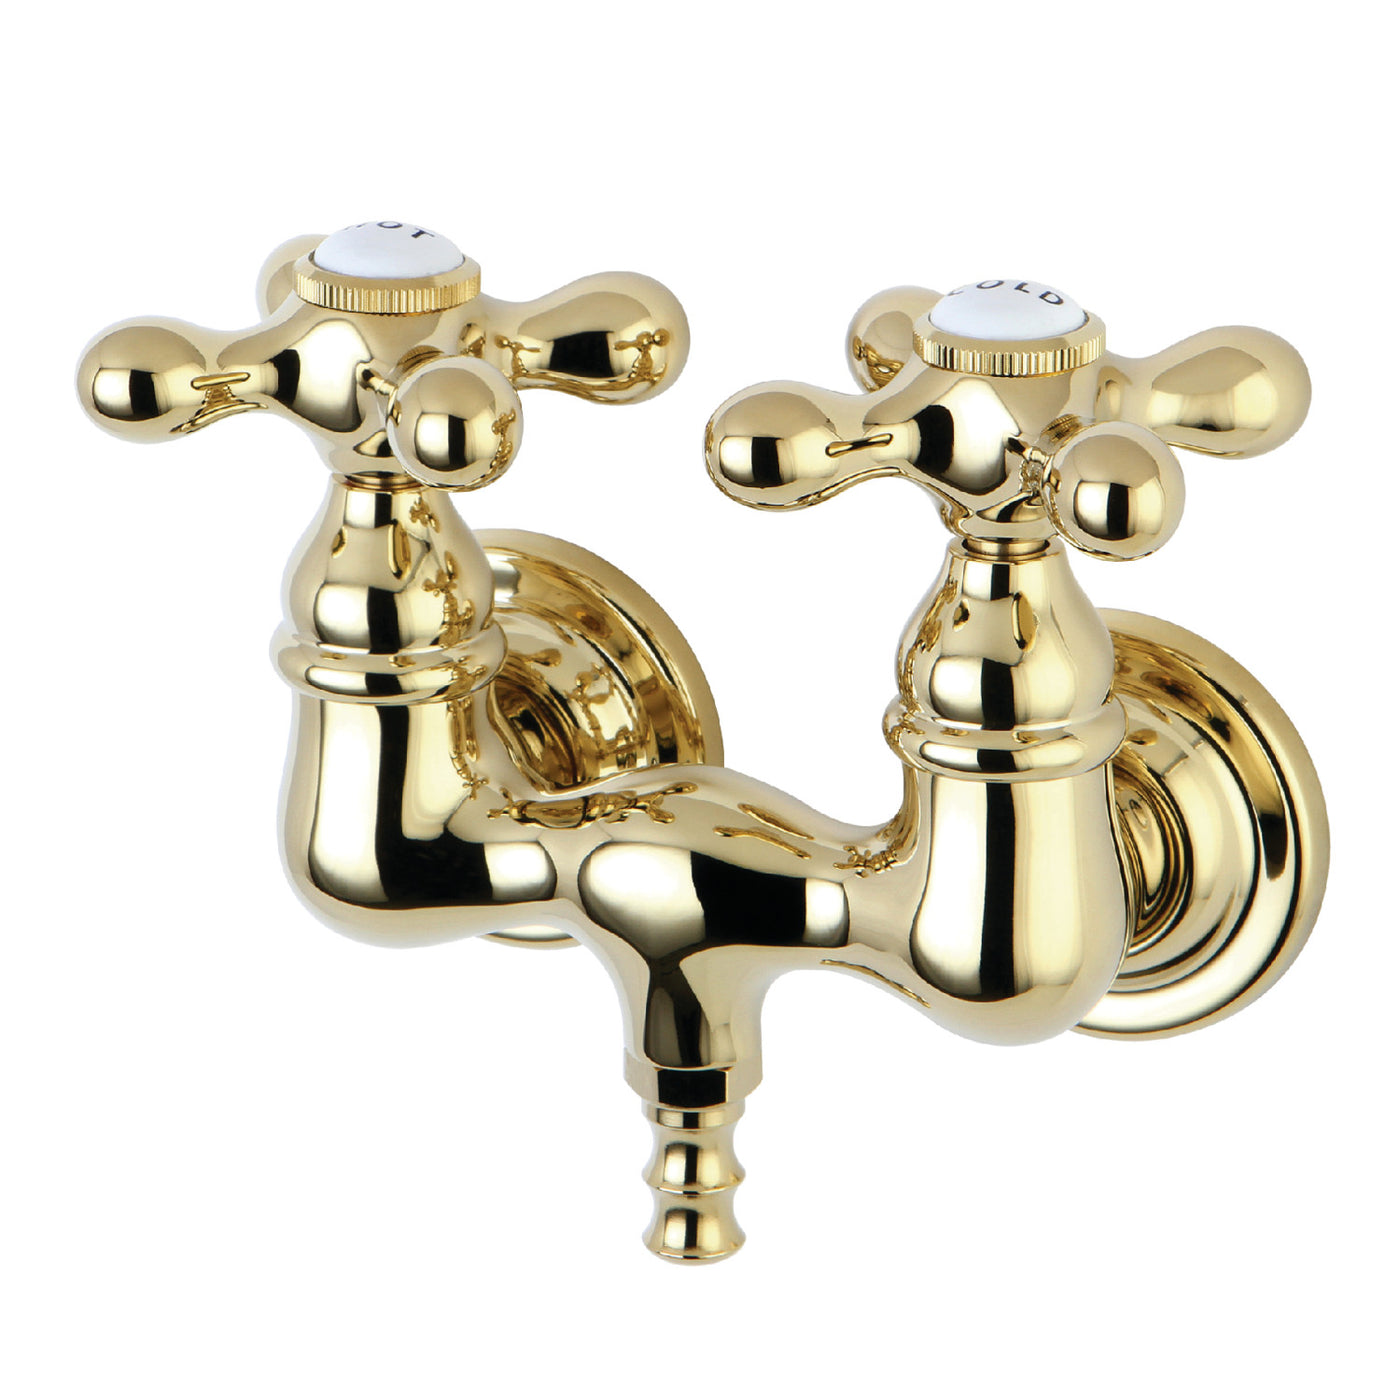 Elements of Design DT0312AX 3-3/8-Inch Wall Mount Tub Faucet, Polished Brass